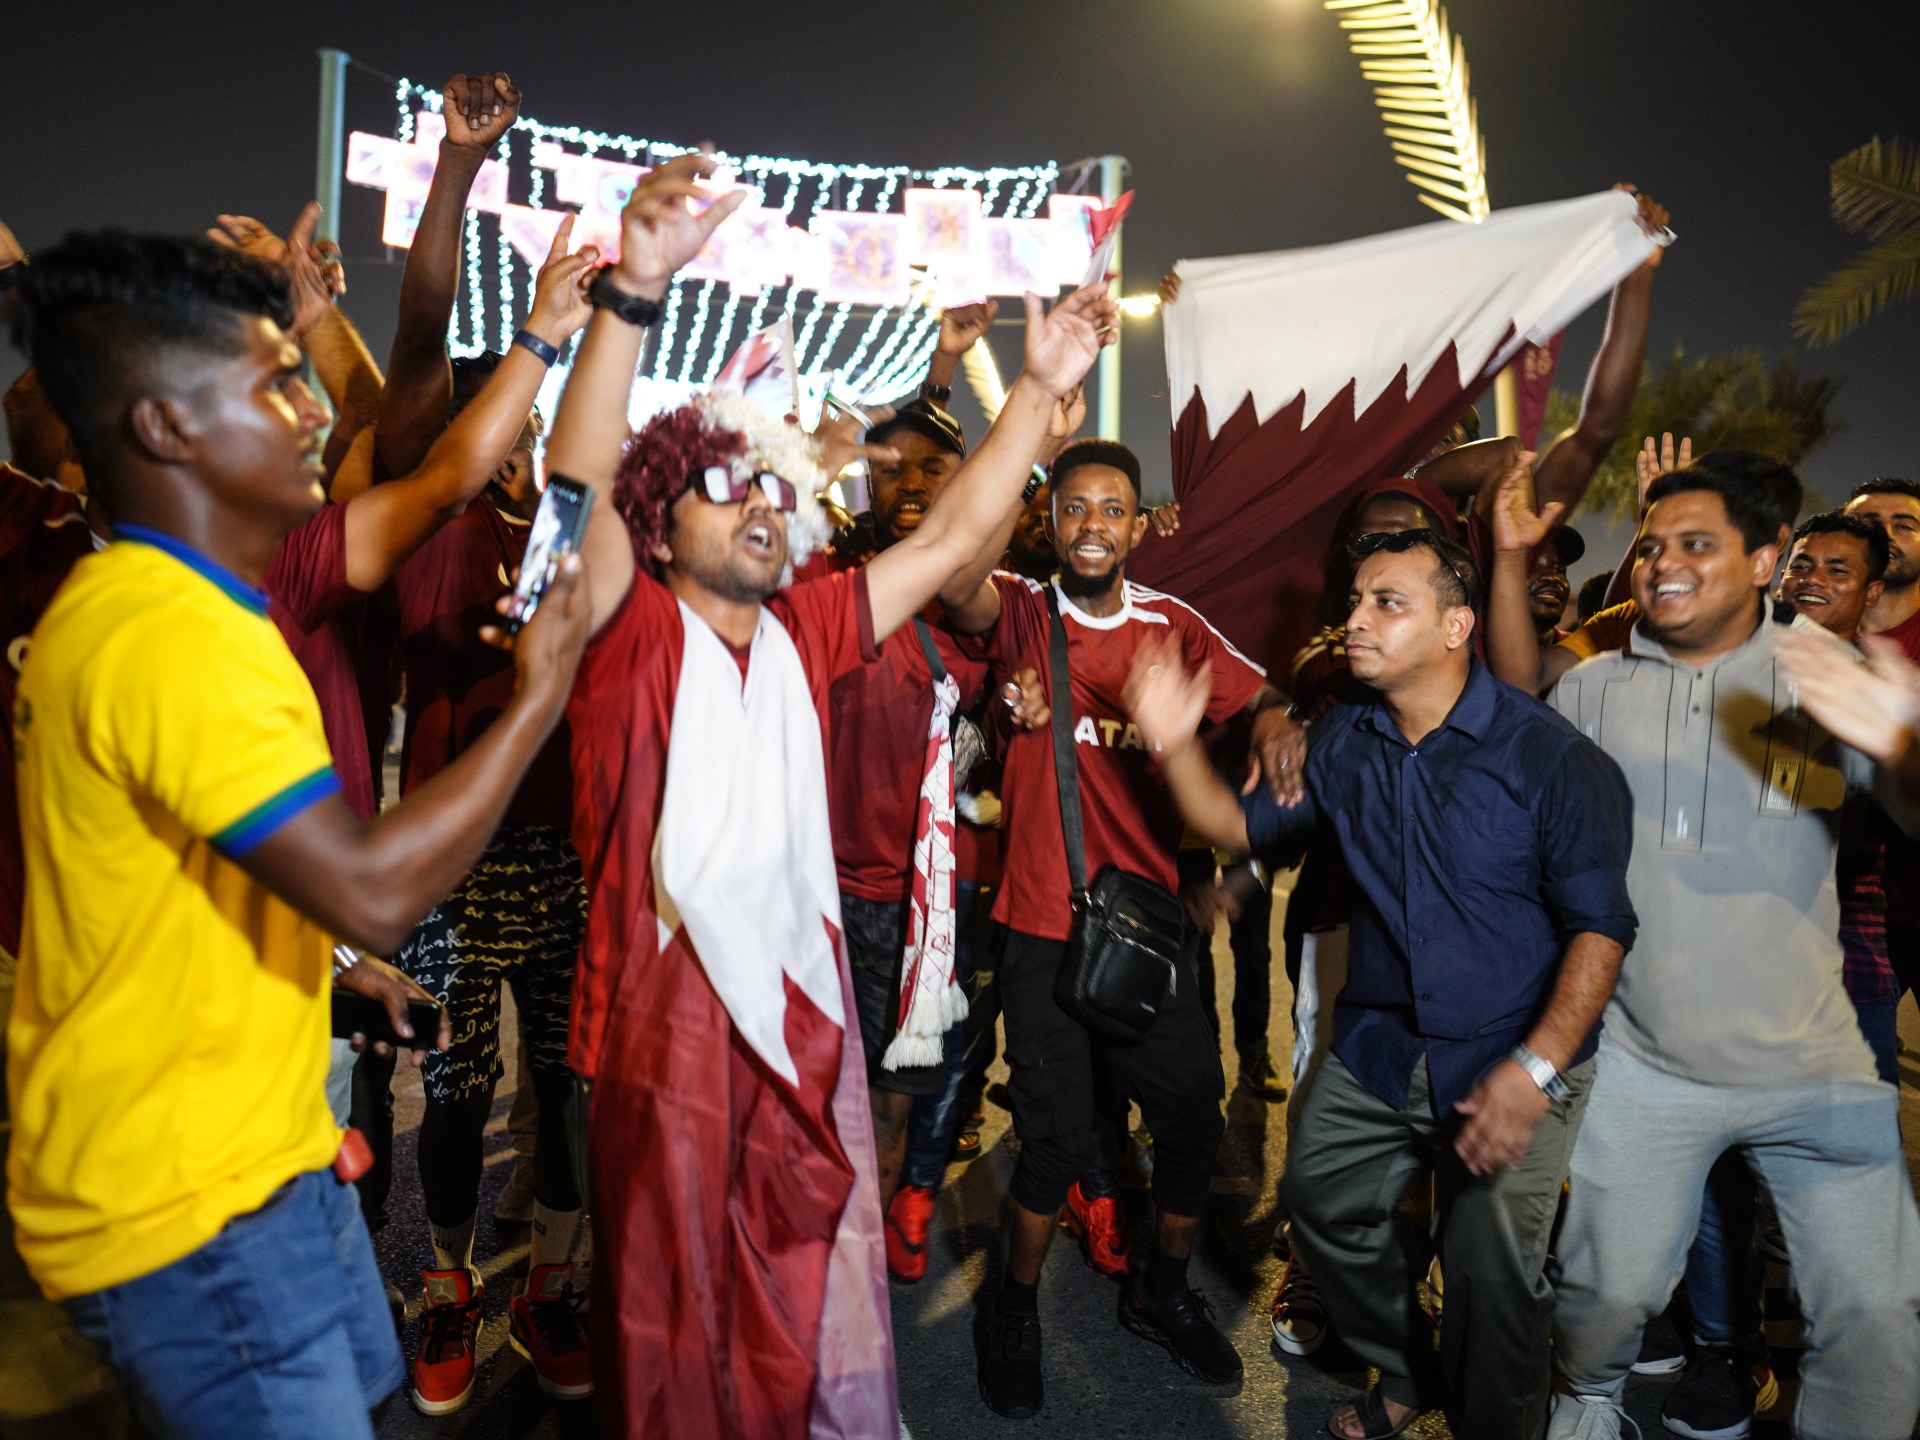 World Cup followers able to social gathering regardless of beer ban in Qatar stadiums